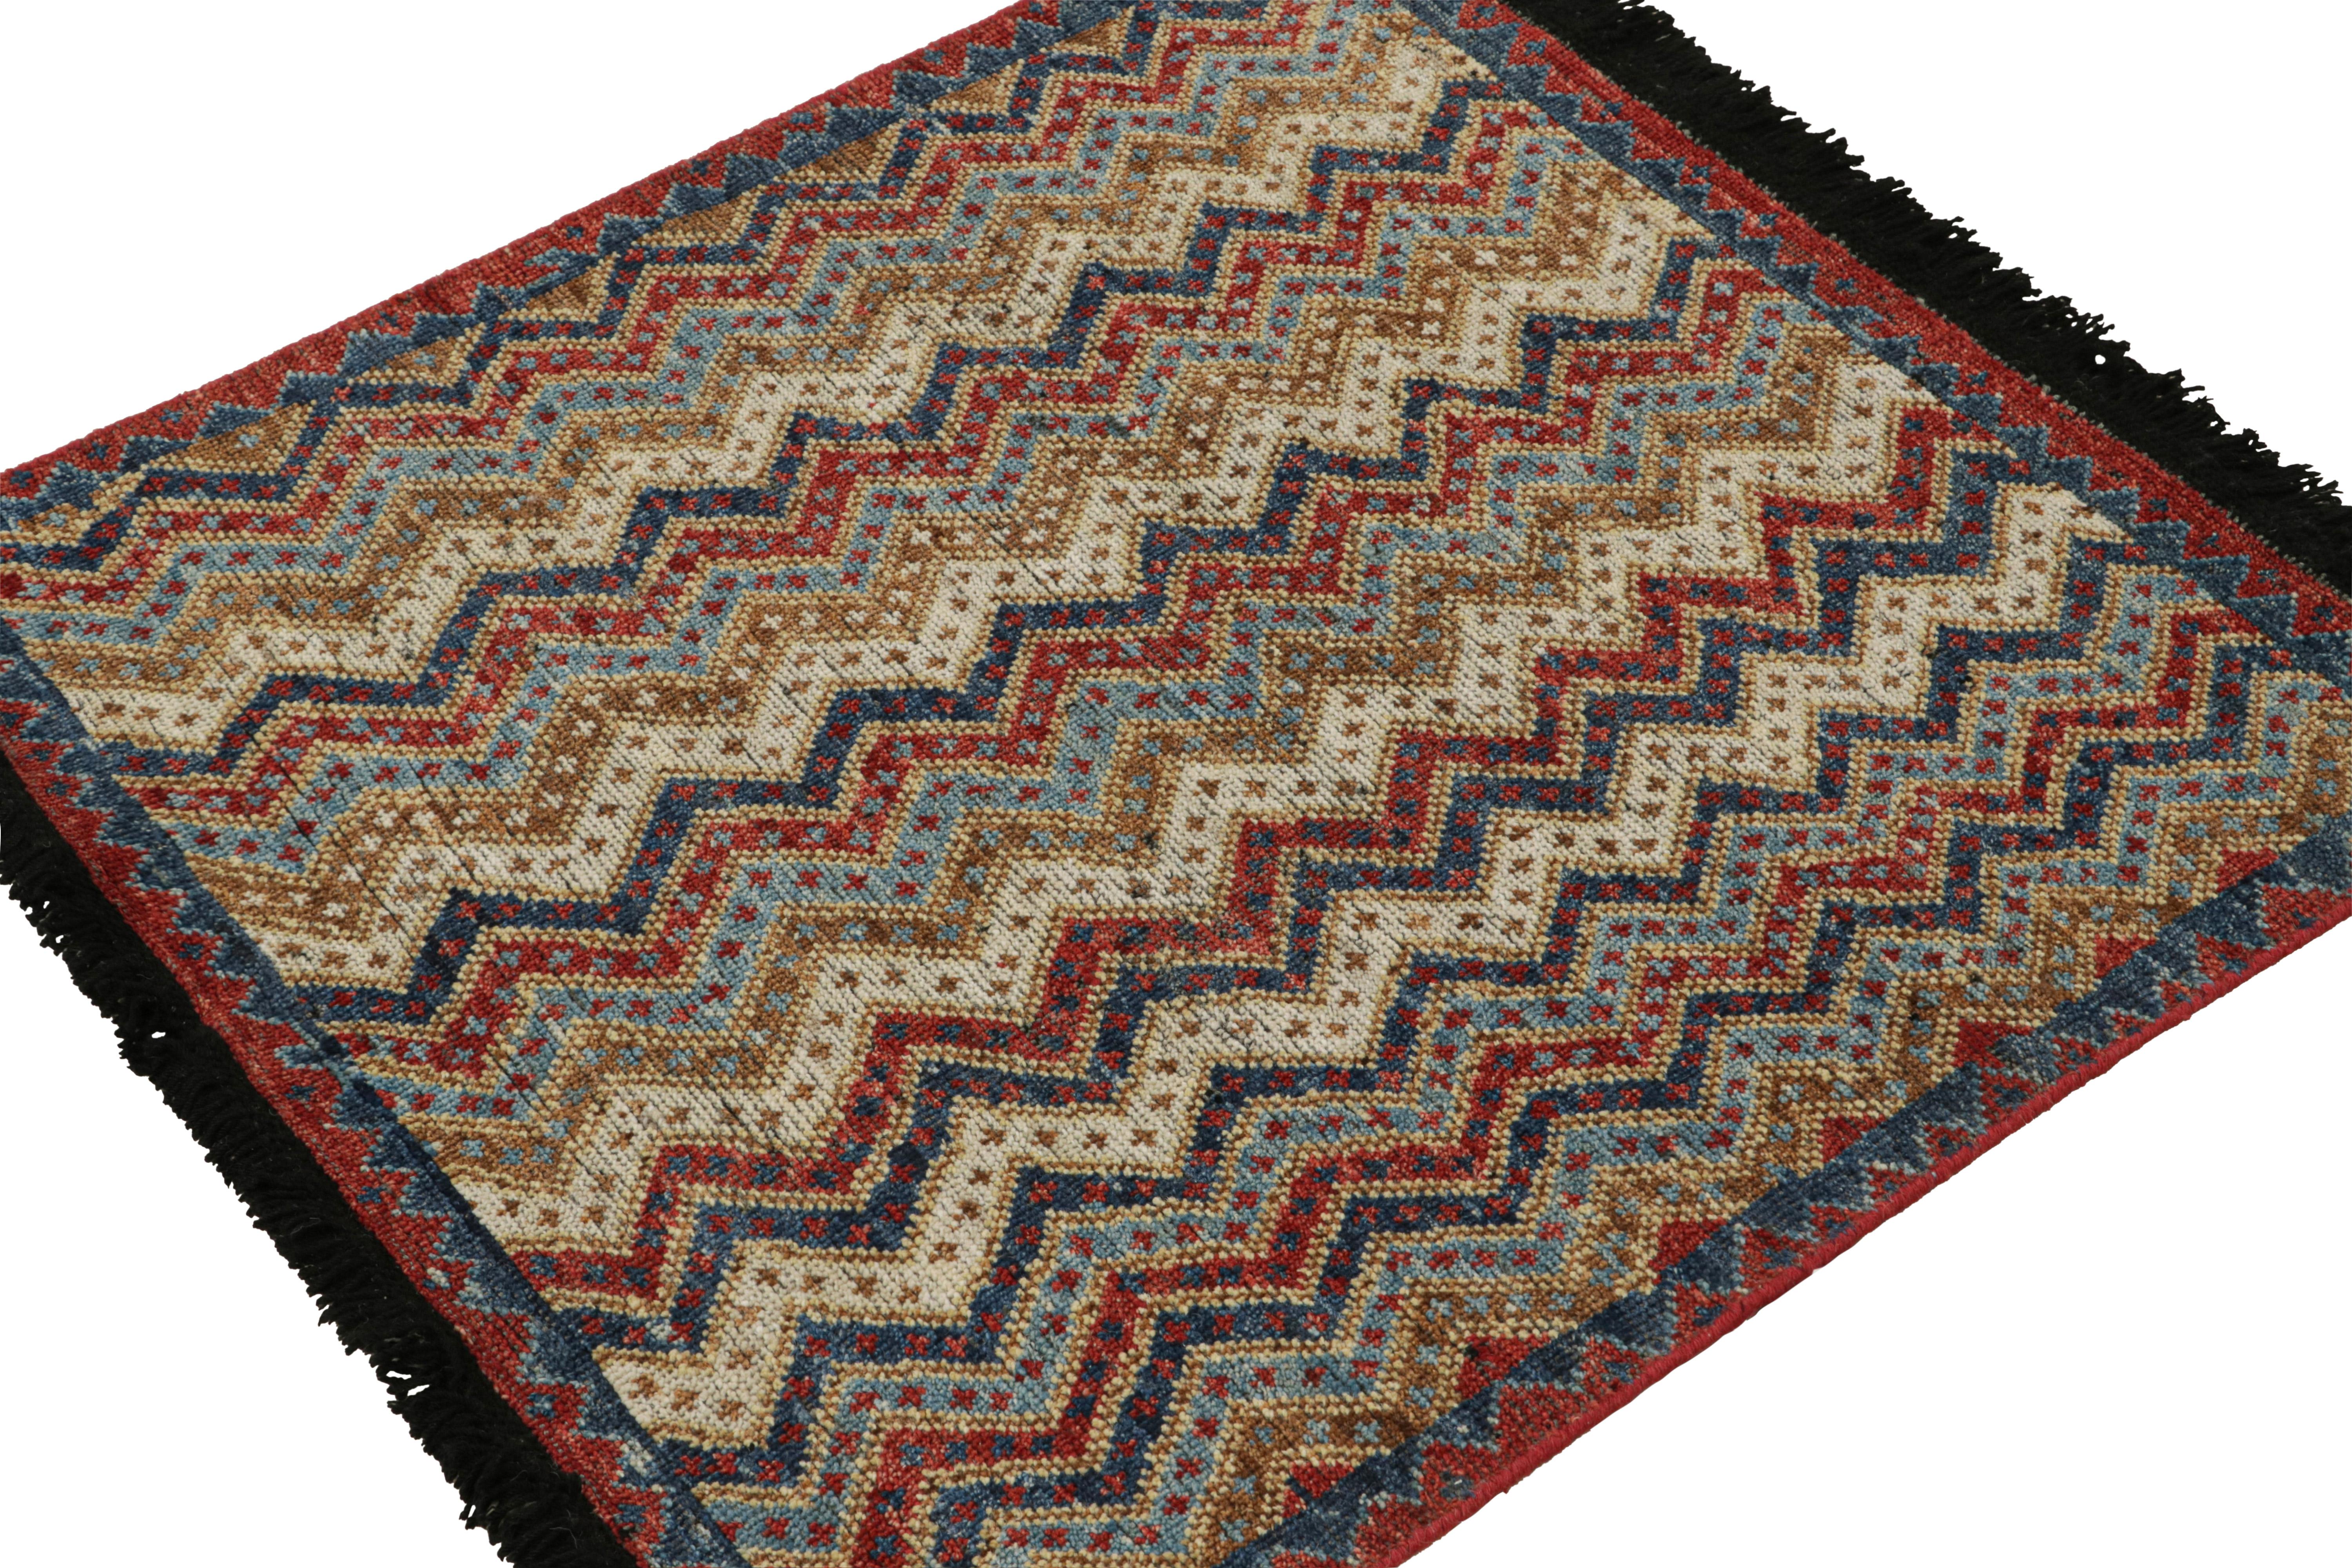 This 3x3 rug is a grand new entry to Rug & Kilim’s custom classics Burano collection. Hand-knotted in wool.

On the design: 

This rug is inspired by antique tribal rugs & features chevrons with fine geometric patterns in rich colors of red, blue,